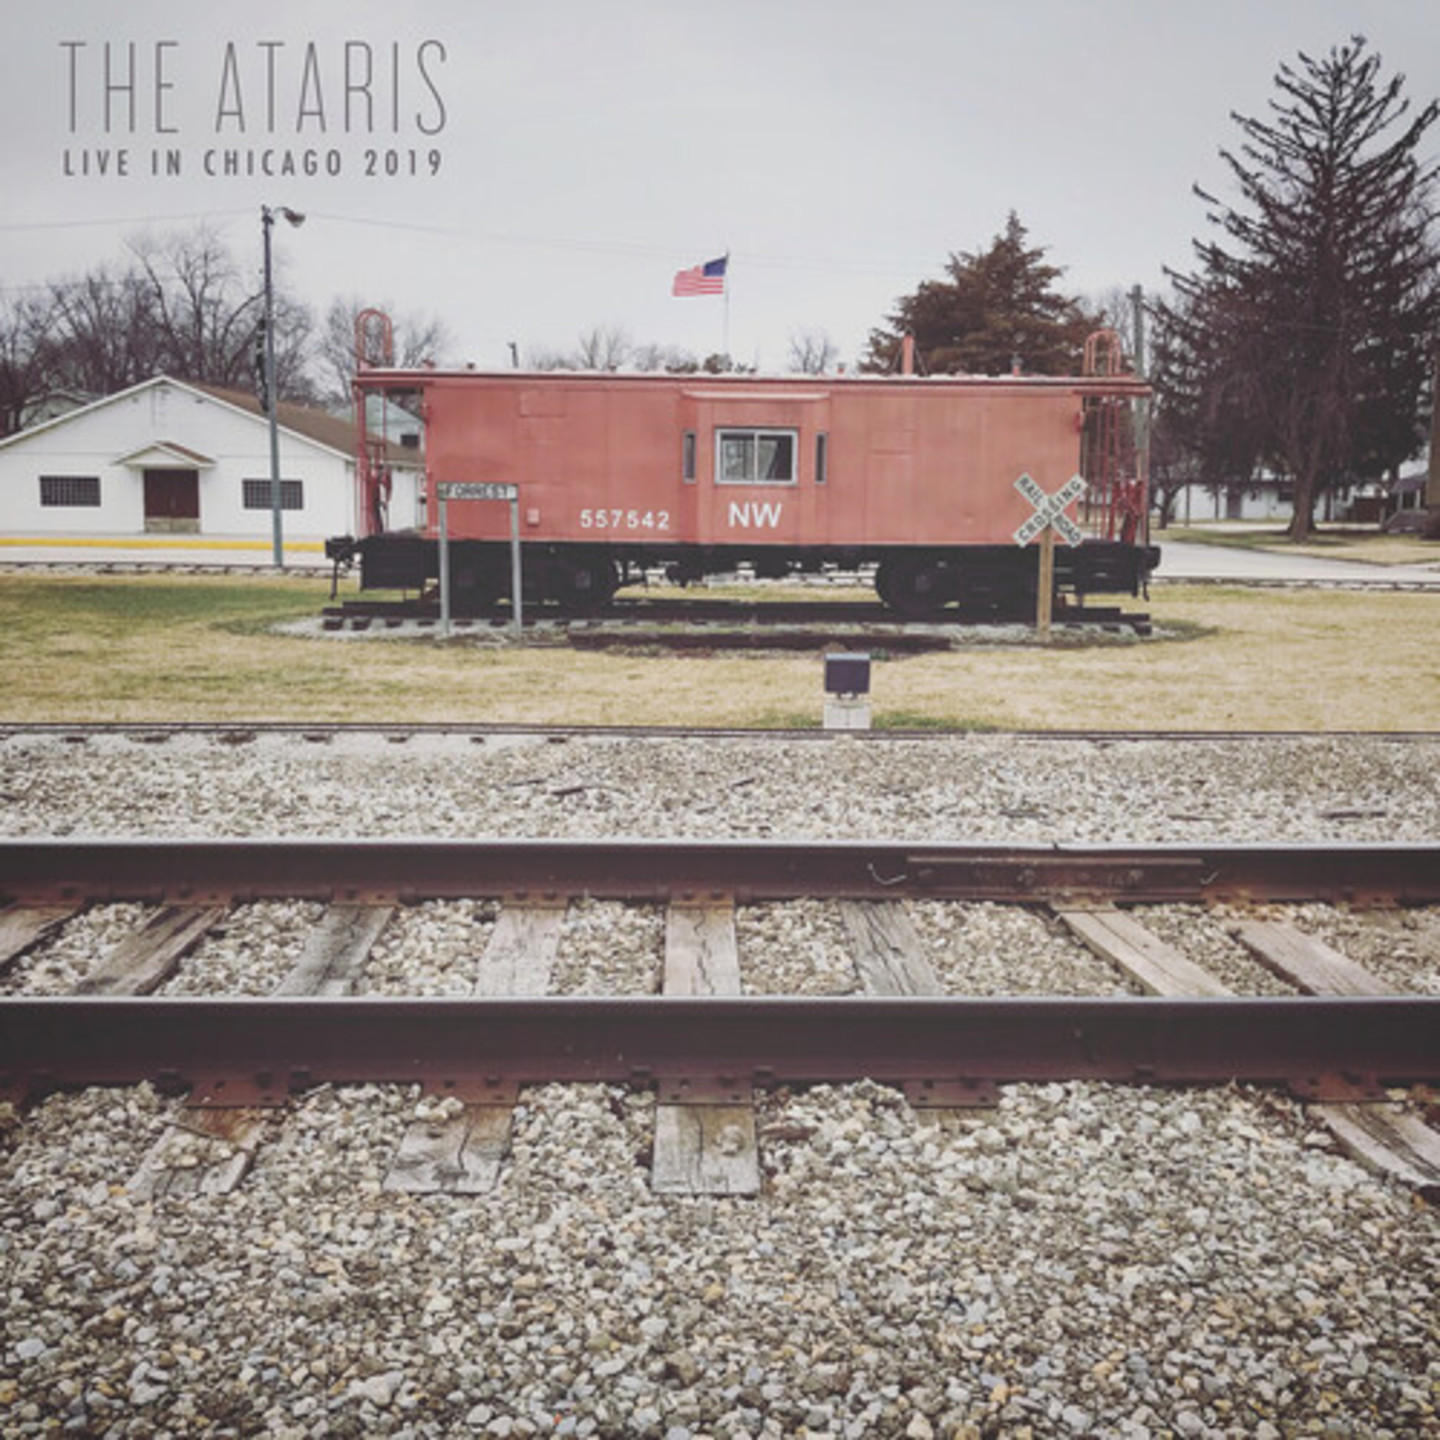 ATARIS, THE - Live In Chicago 2019 LP Clear Vinyl